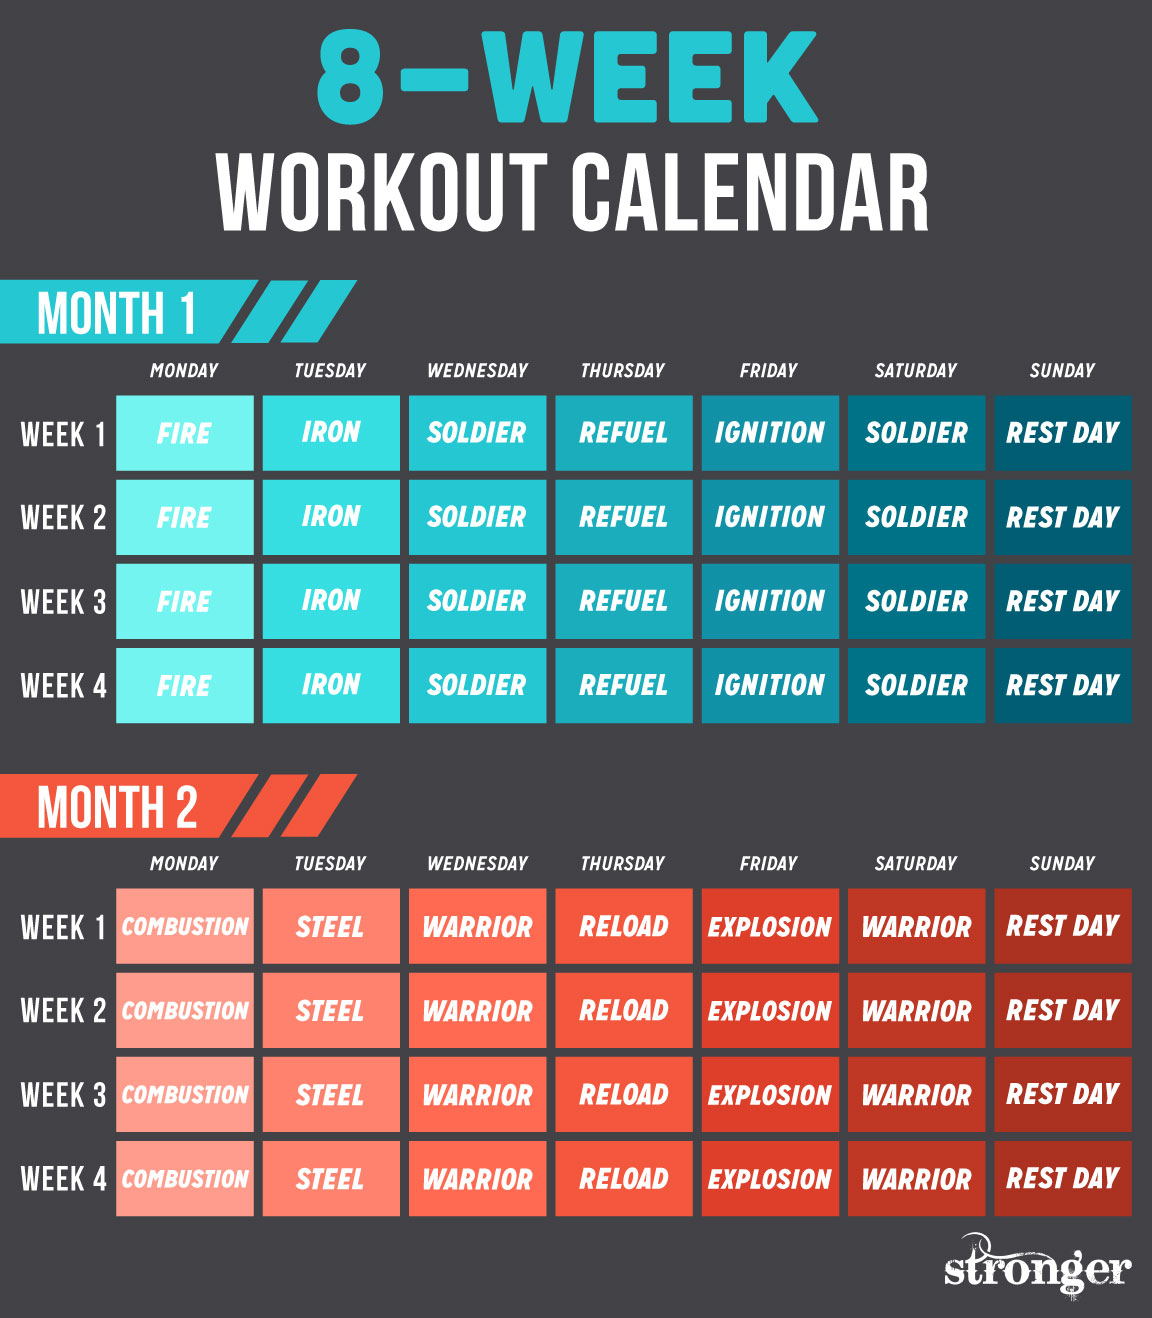 Stronger With SELF Challenge Workout Calendar